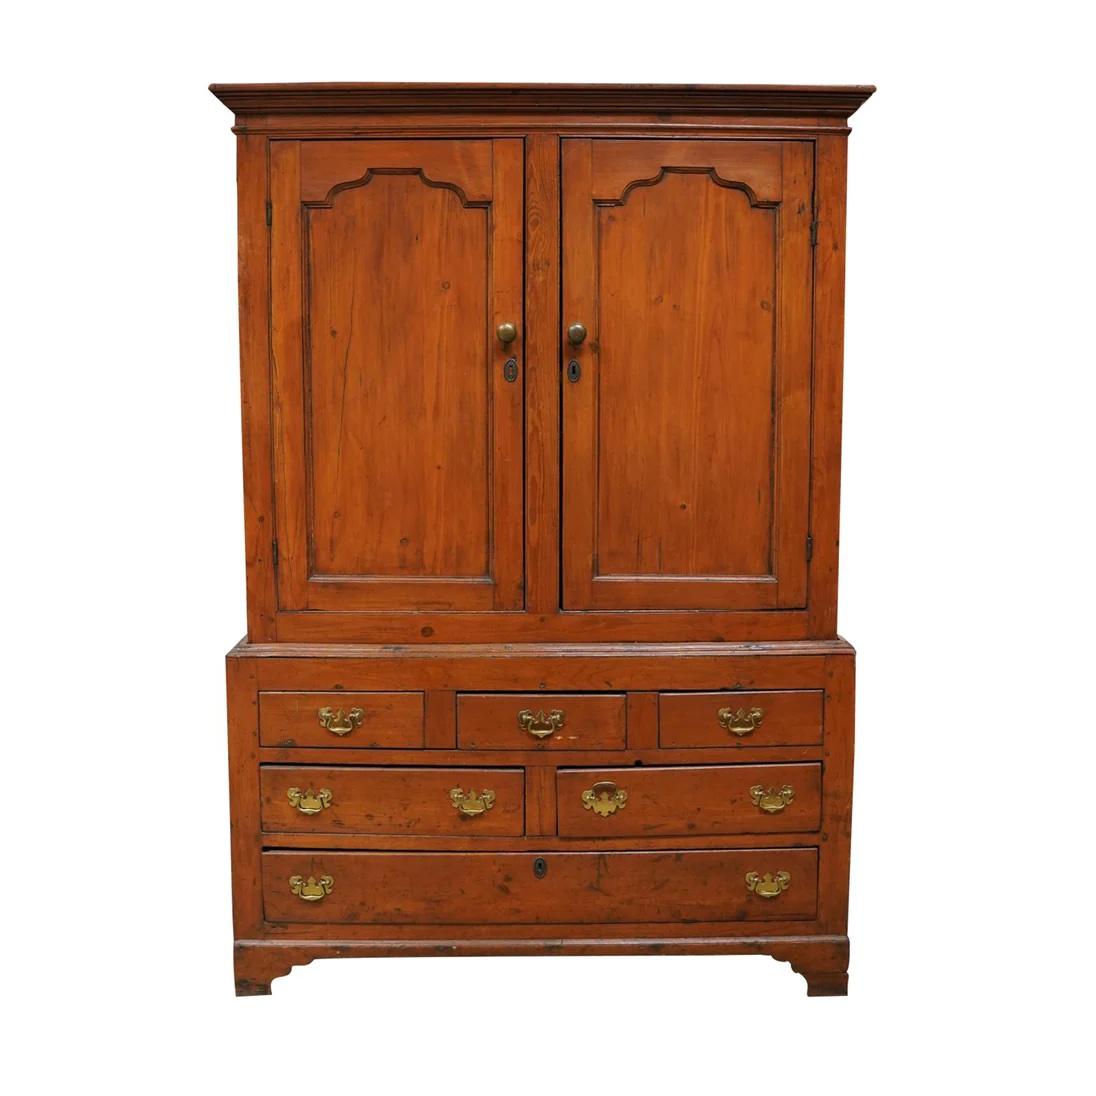 Late 18th C American Pine Linen Press constructed in an upper and lower section. Two upper paneled doors open to a compartment with two shelves. Lower section is comprised of three drawers over two drawers over one drawer. Retains early finish with